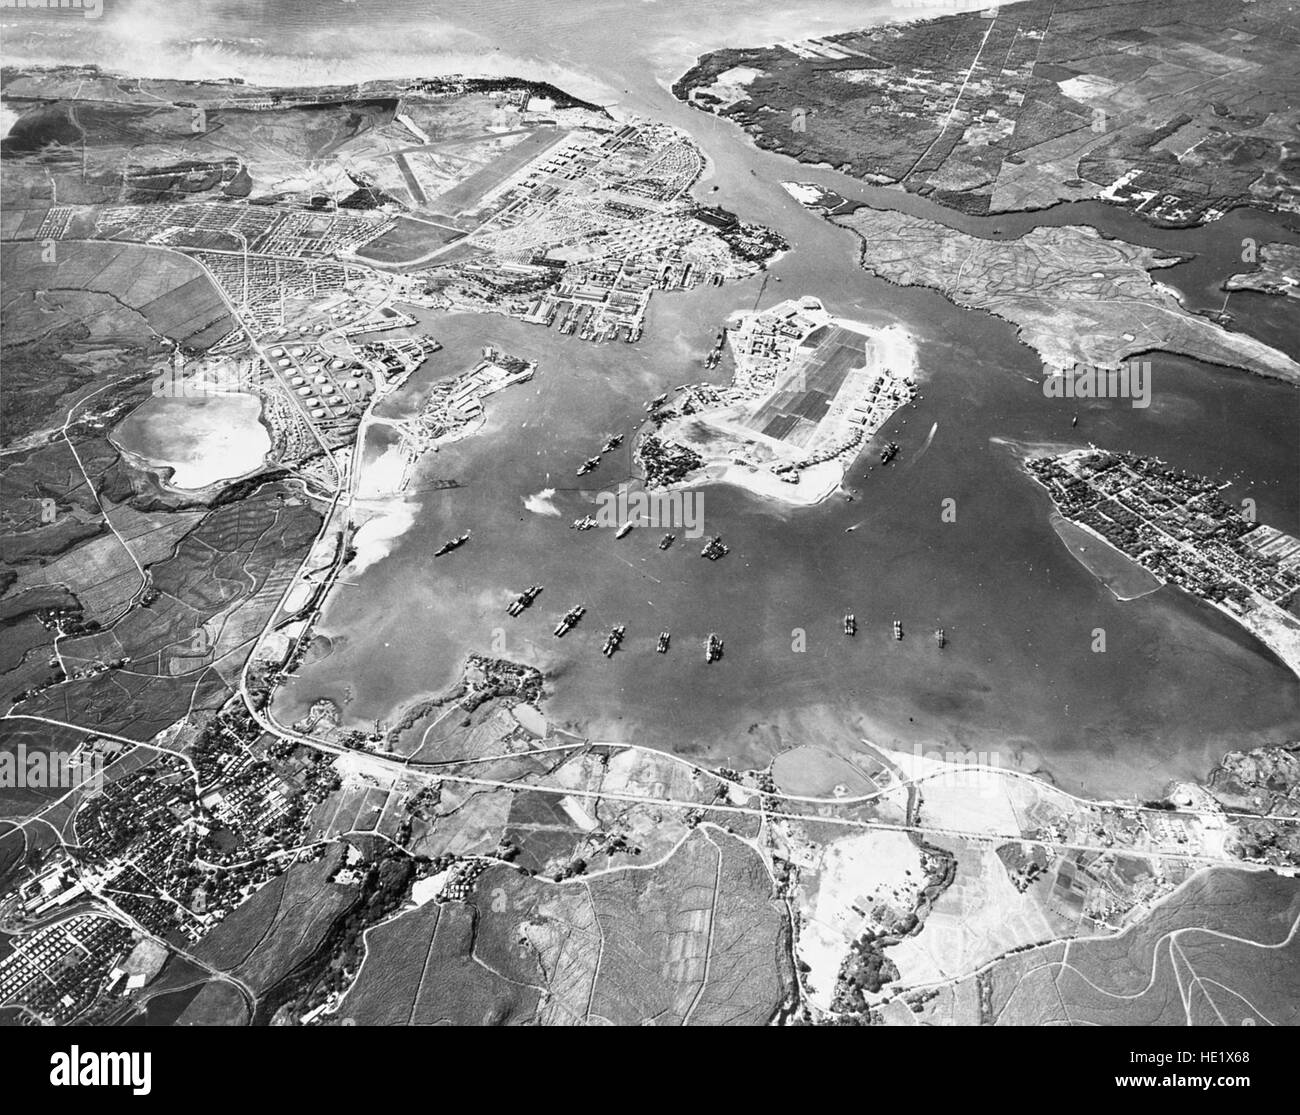 Aerial view of the U.S. Naval Operating Base, Pearl Harbor, Oahu, Hawaii USA, looking southwest on 30 October 1941. Ford Island Naval Air Station is in the center, with the Pearl Harbor Navy Yard just beyond it, across the channel. The airfield in the upper left-center is the U.S. Army's Hickam Field. Stock Photo